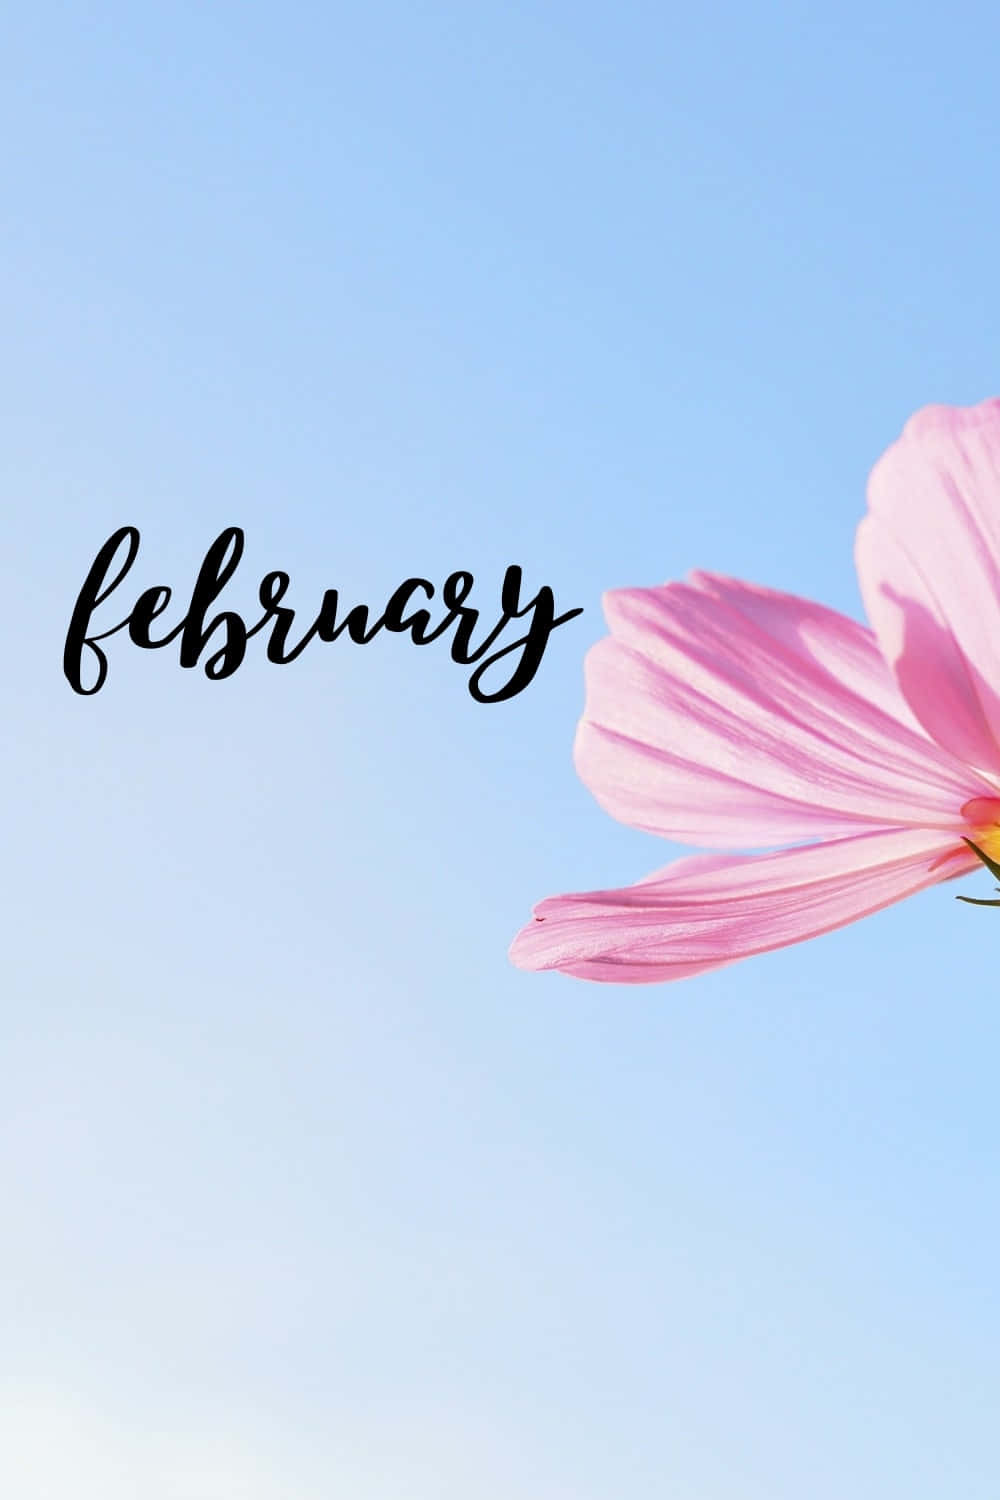 A pink, heart-shaped balloon with February calendar in the background Wallpaper